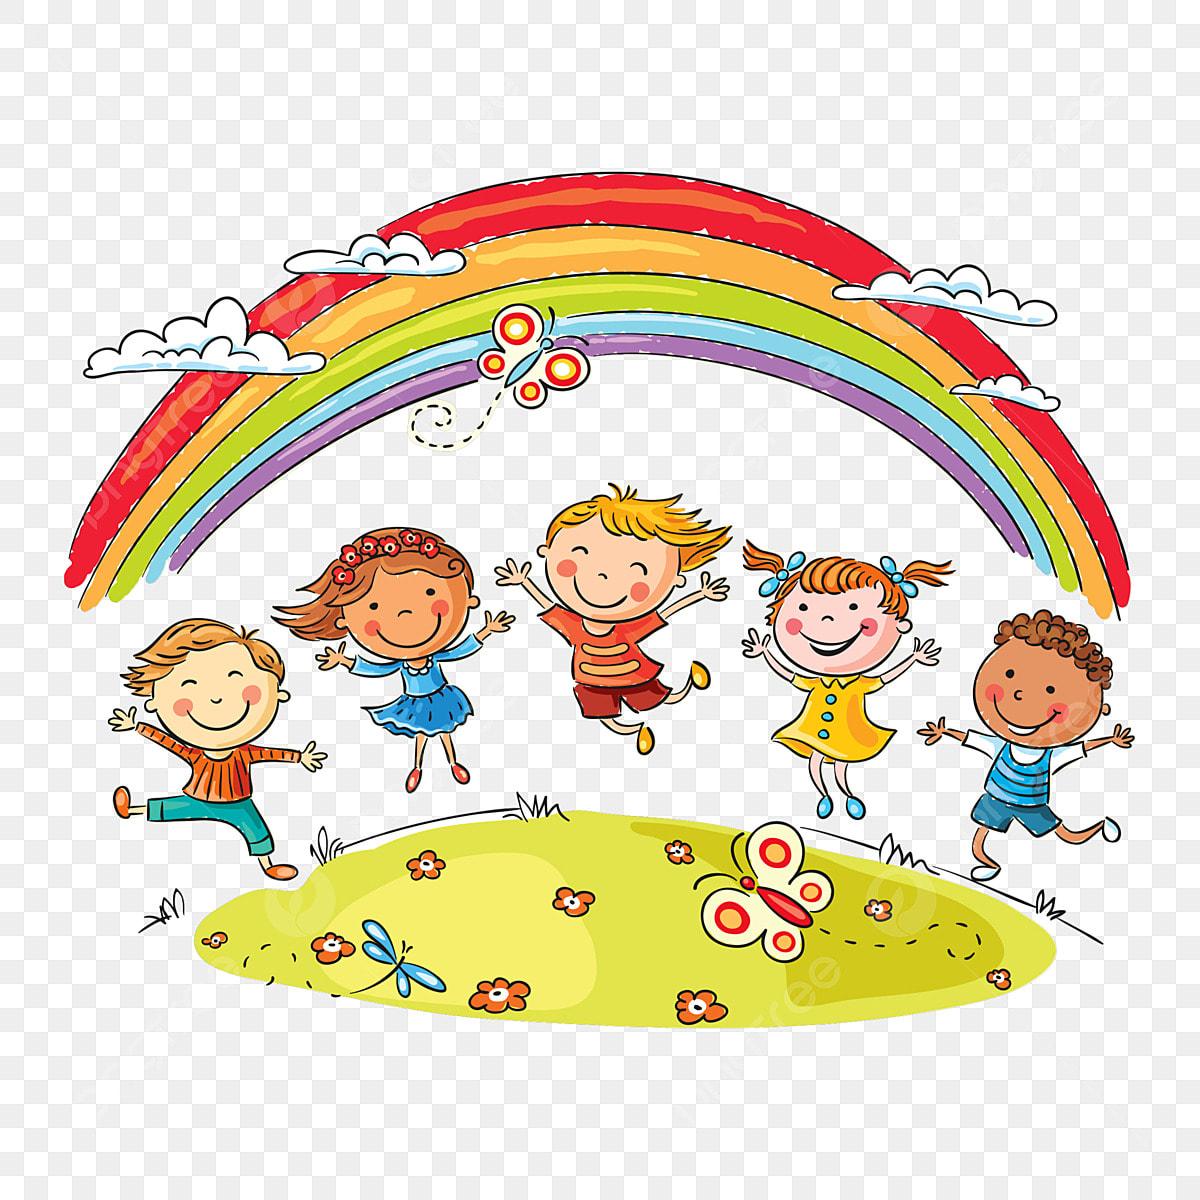 pngtree-children-playing-rainbow-png-image_3993784